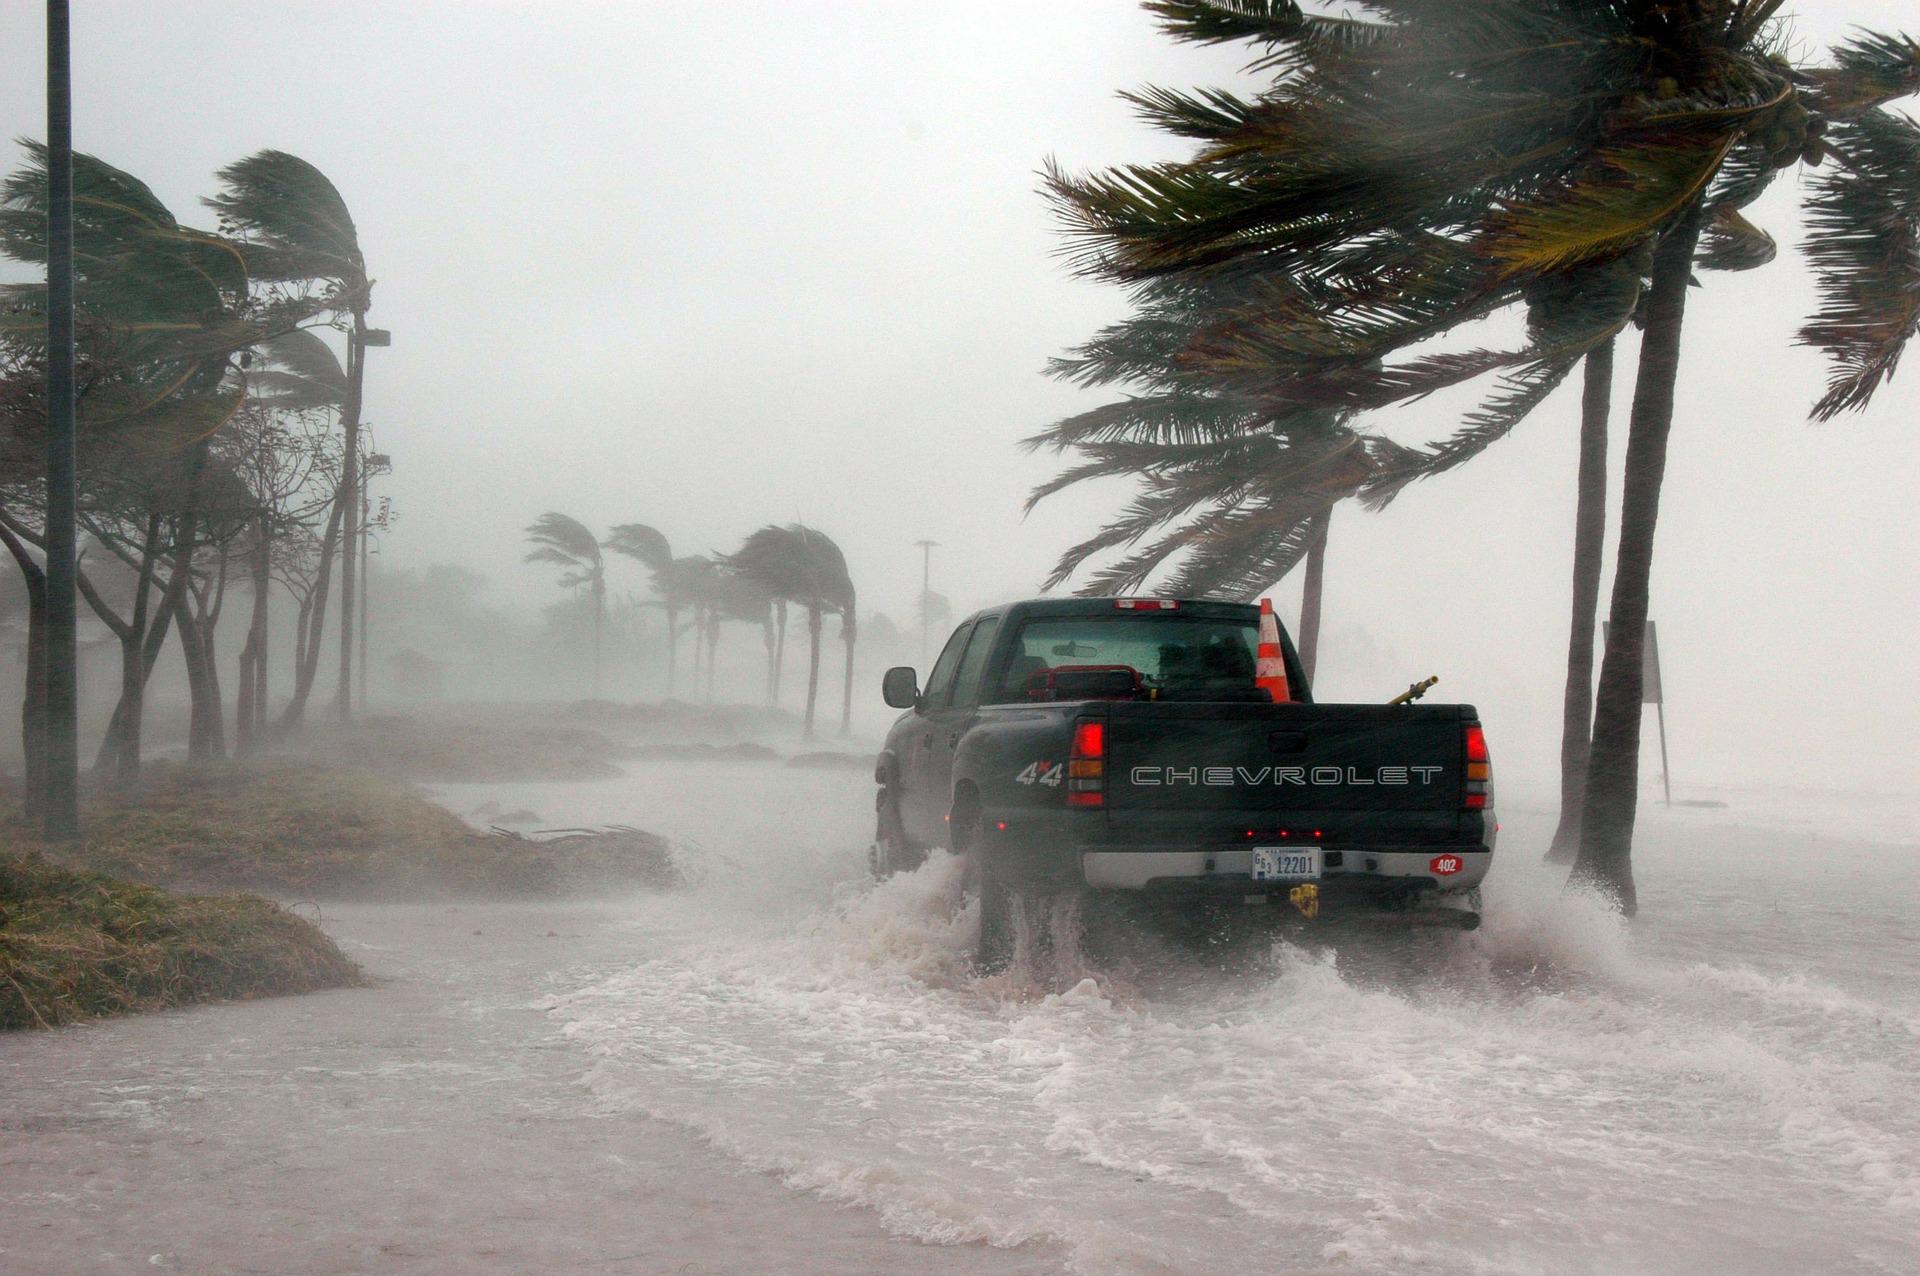 hurricane winds and flooding in Florida